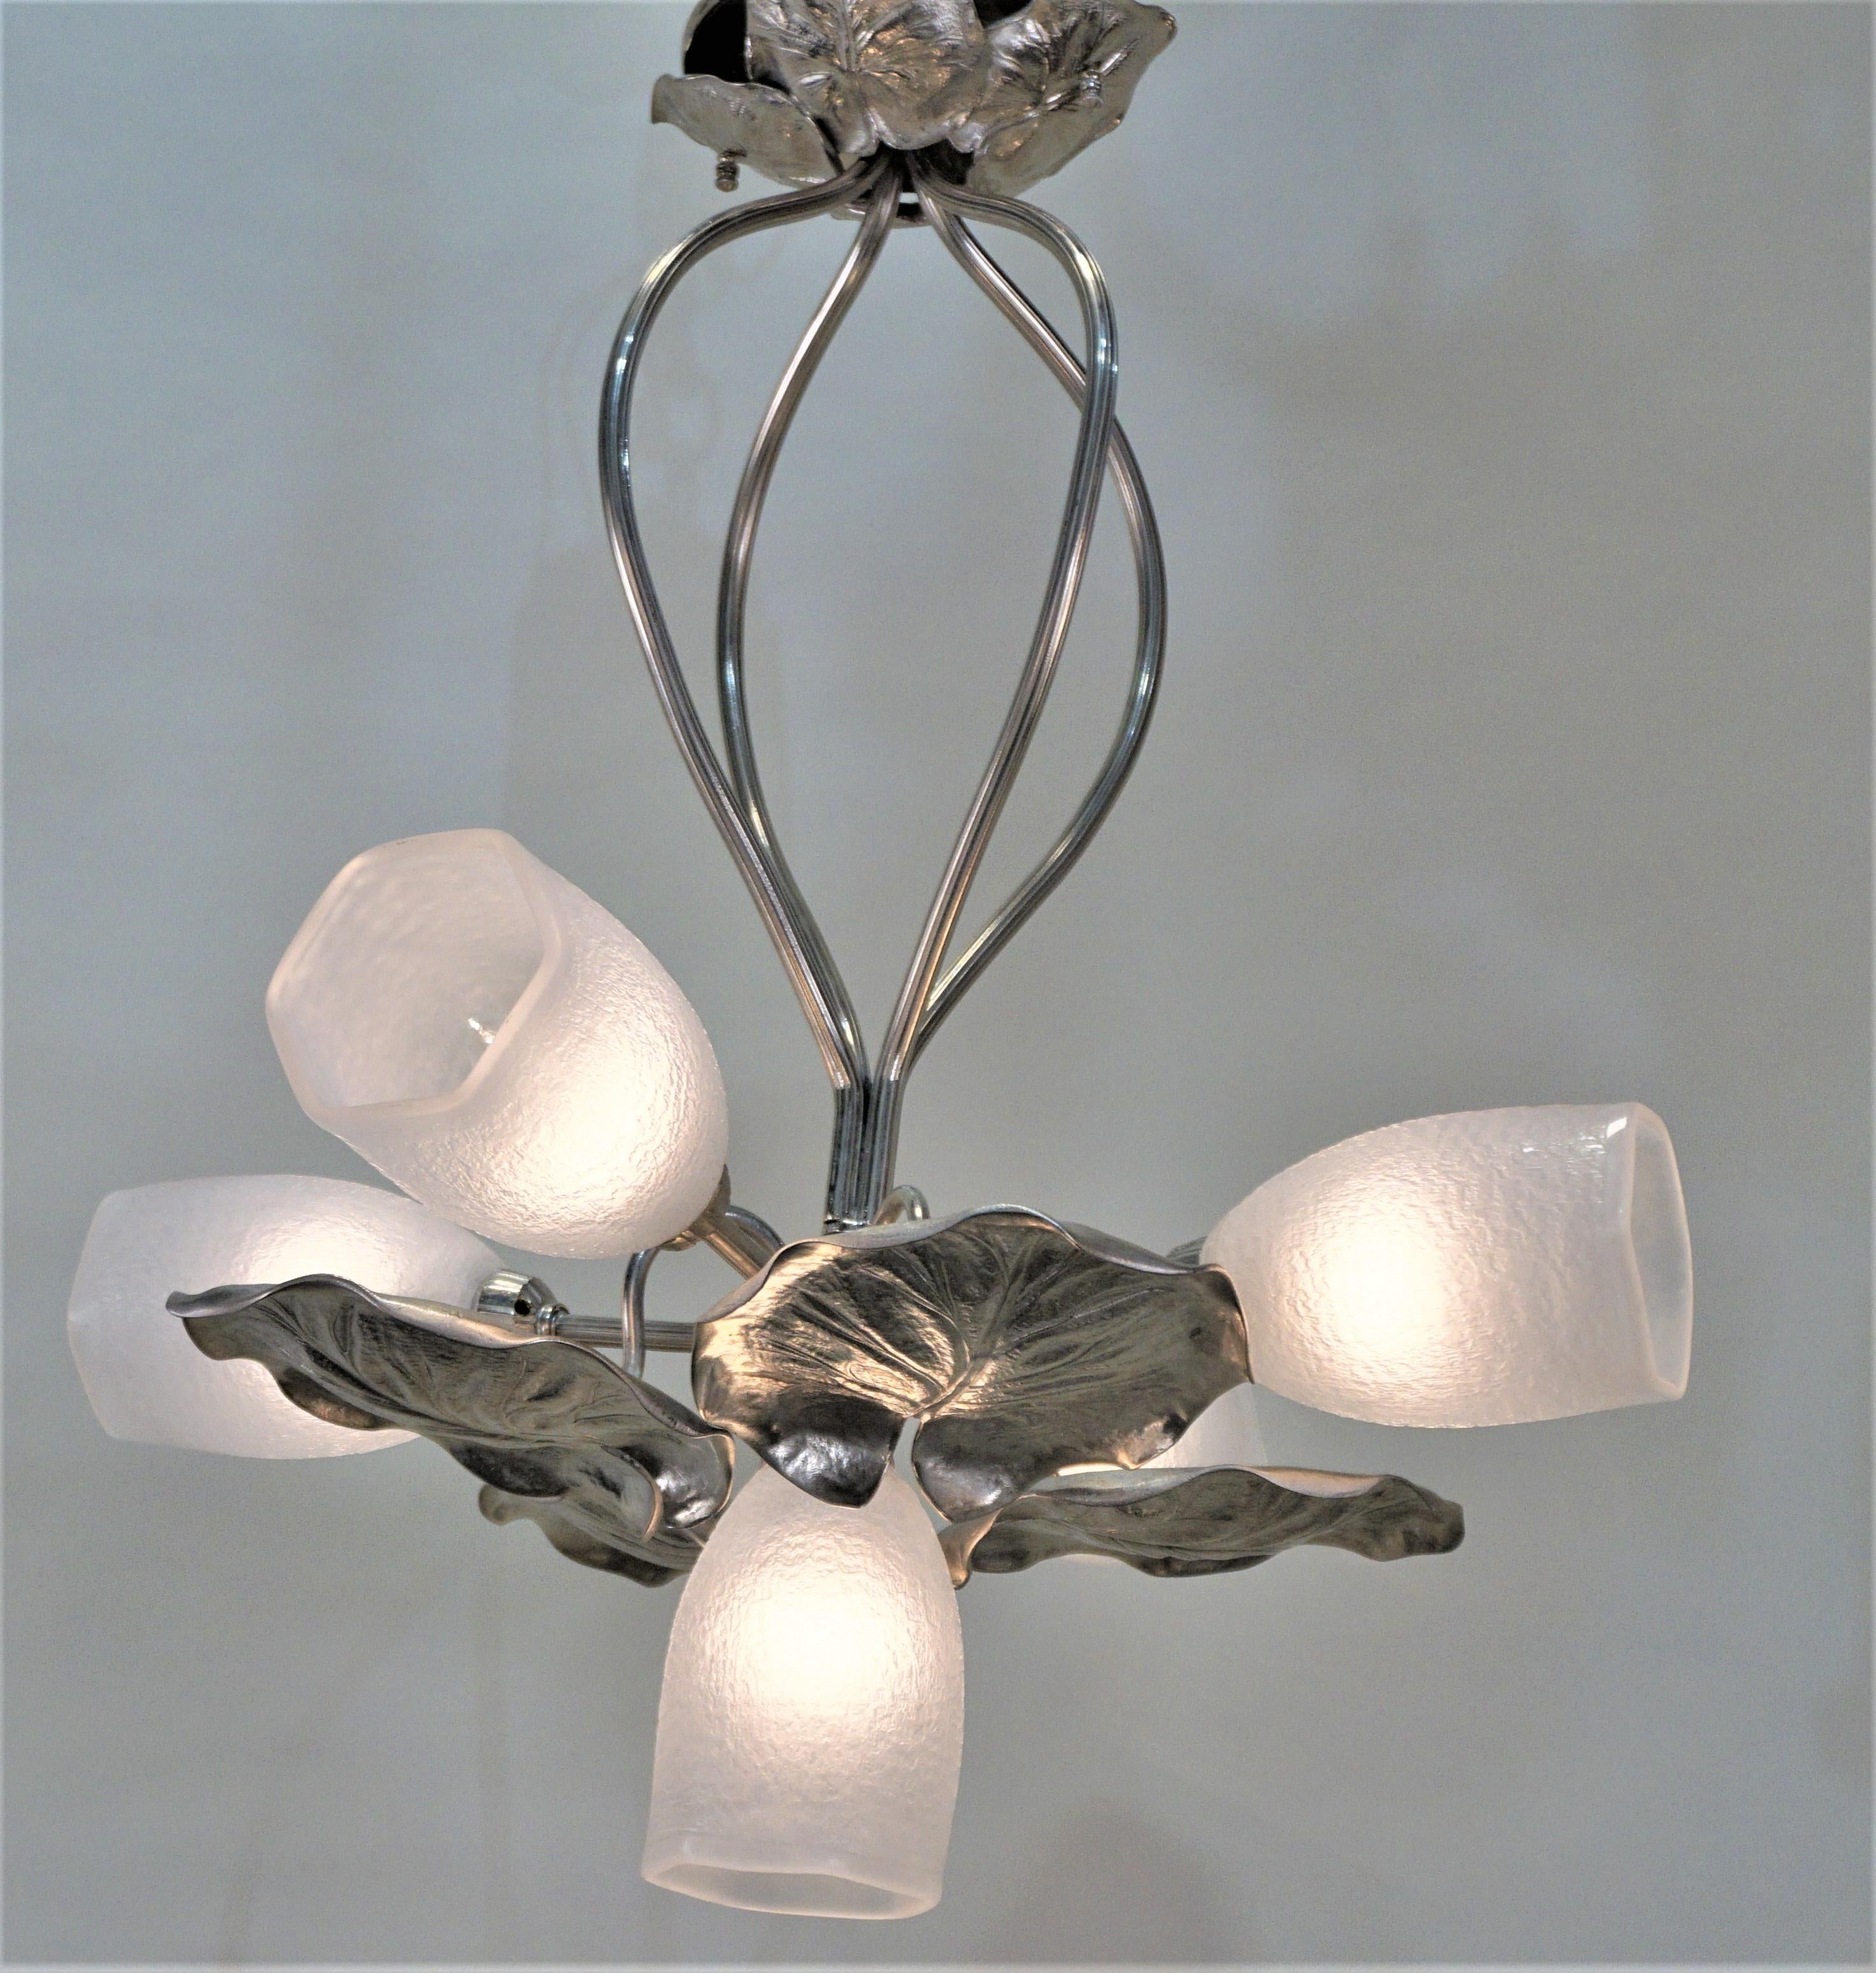 This French 1910s-1920s Art Nouveau chandelier is made of beautiful nickel on bronze and glass.
Four large nickel on bronze leaves hang from the center, and five shaped glass shades extend outwards, creating a naturally inspired design.
This